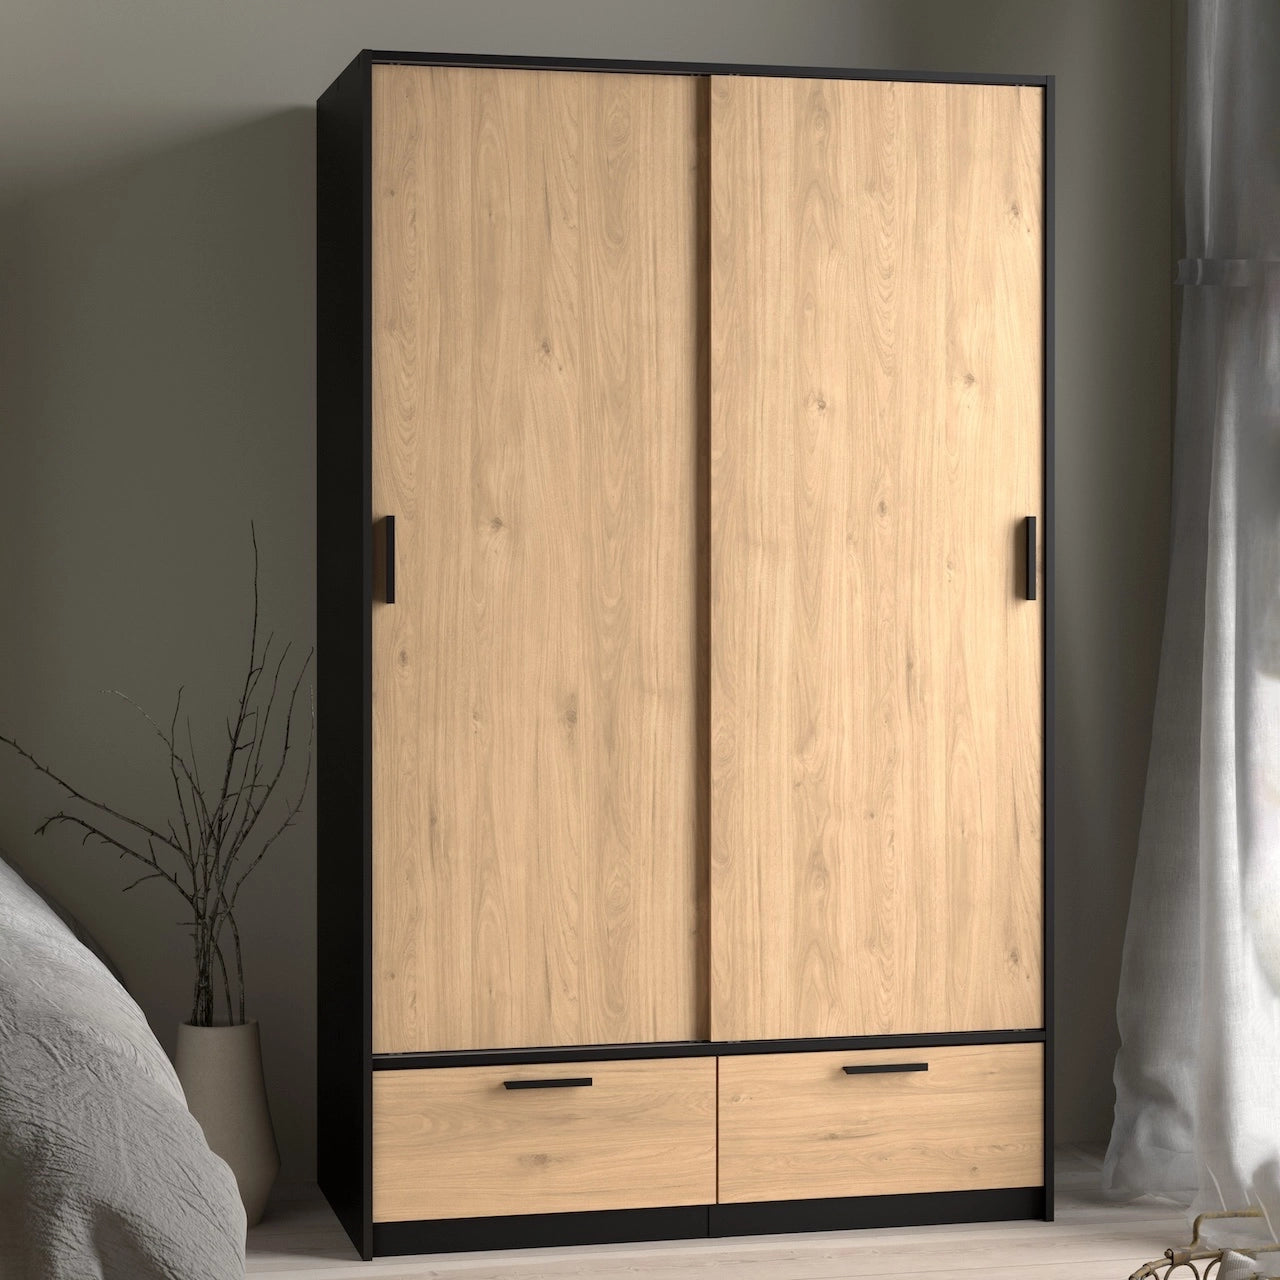 Furniture To Go Line Wardrobe with 2 Doors + 2 Drawers in Black & Jackson Hickory Oak